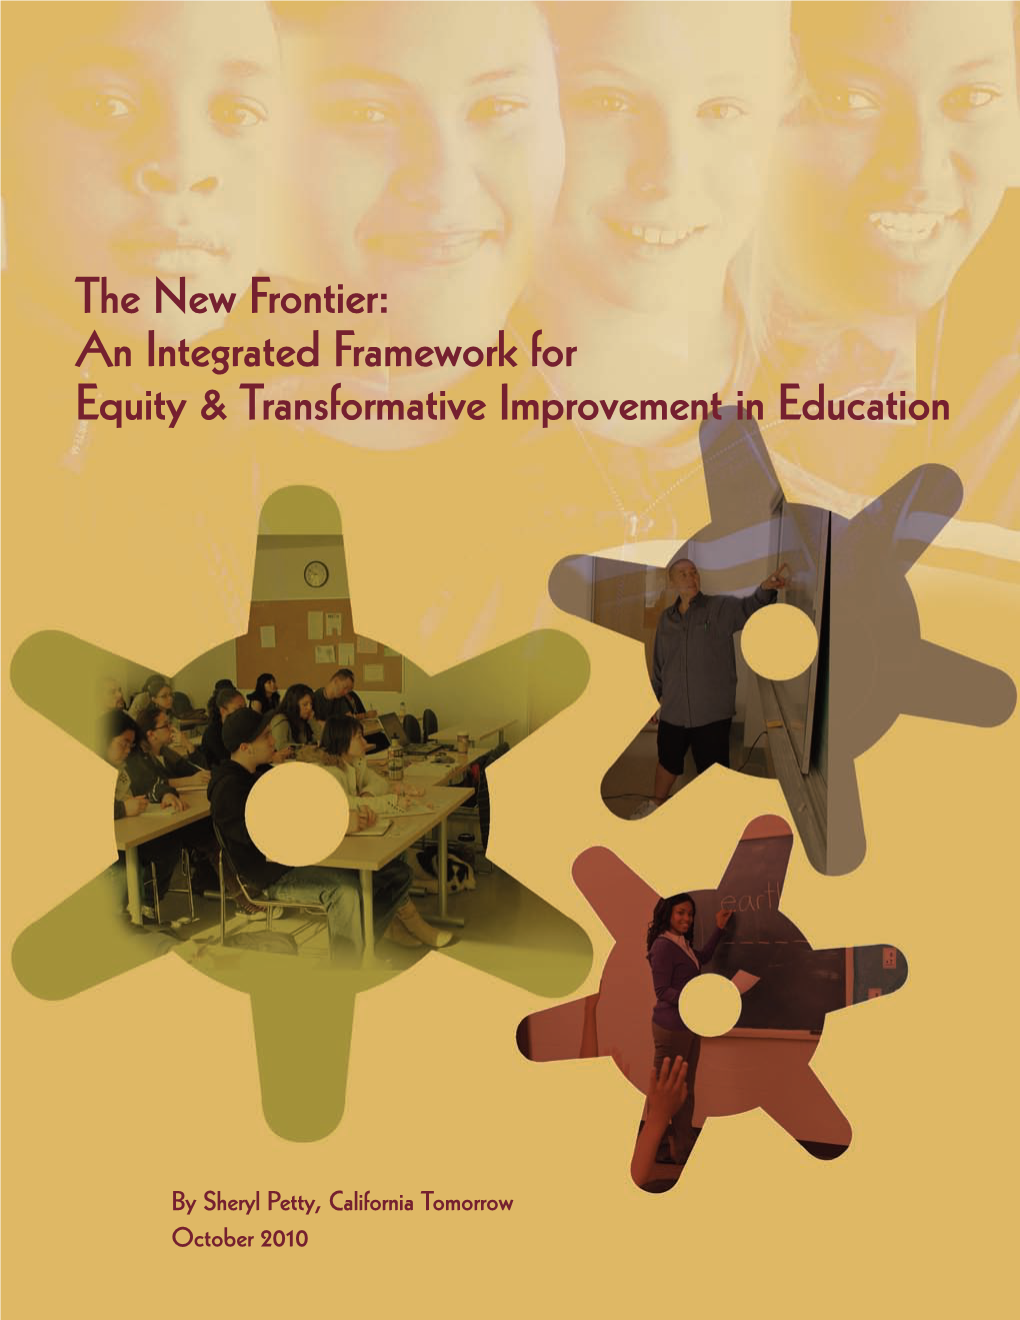 The New Frontier: an Integrated Framework for Equity & Transformative Improvement in Education